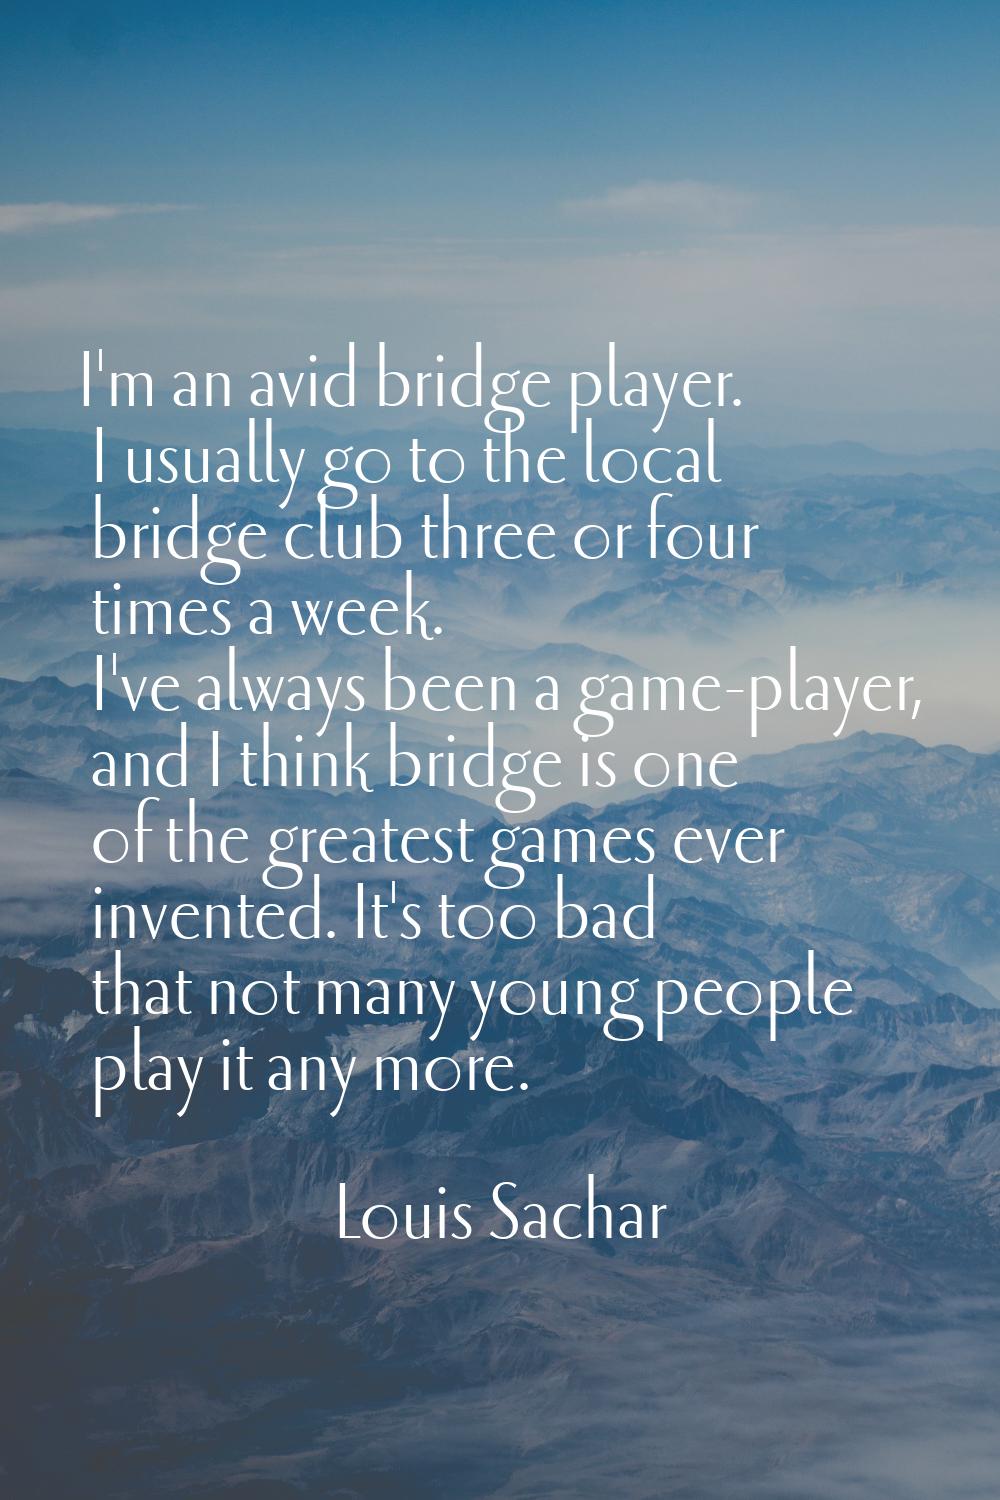 I'm an avid bridge player. I usually go to the local bridge club three or four times a week. I've a